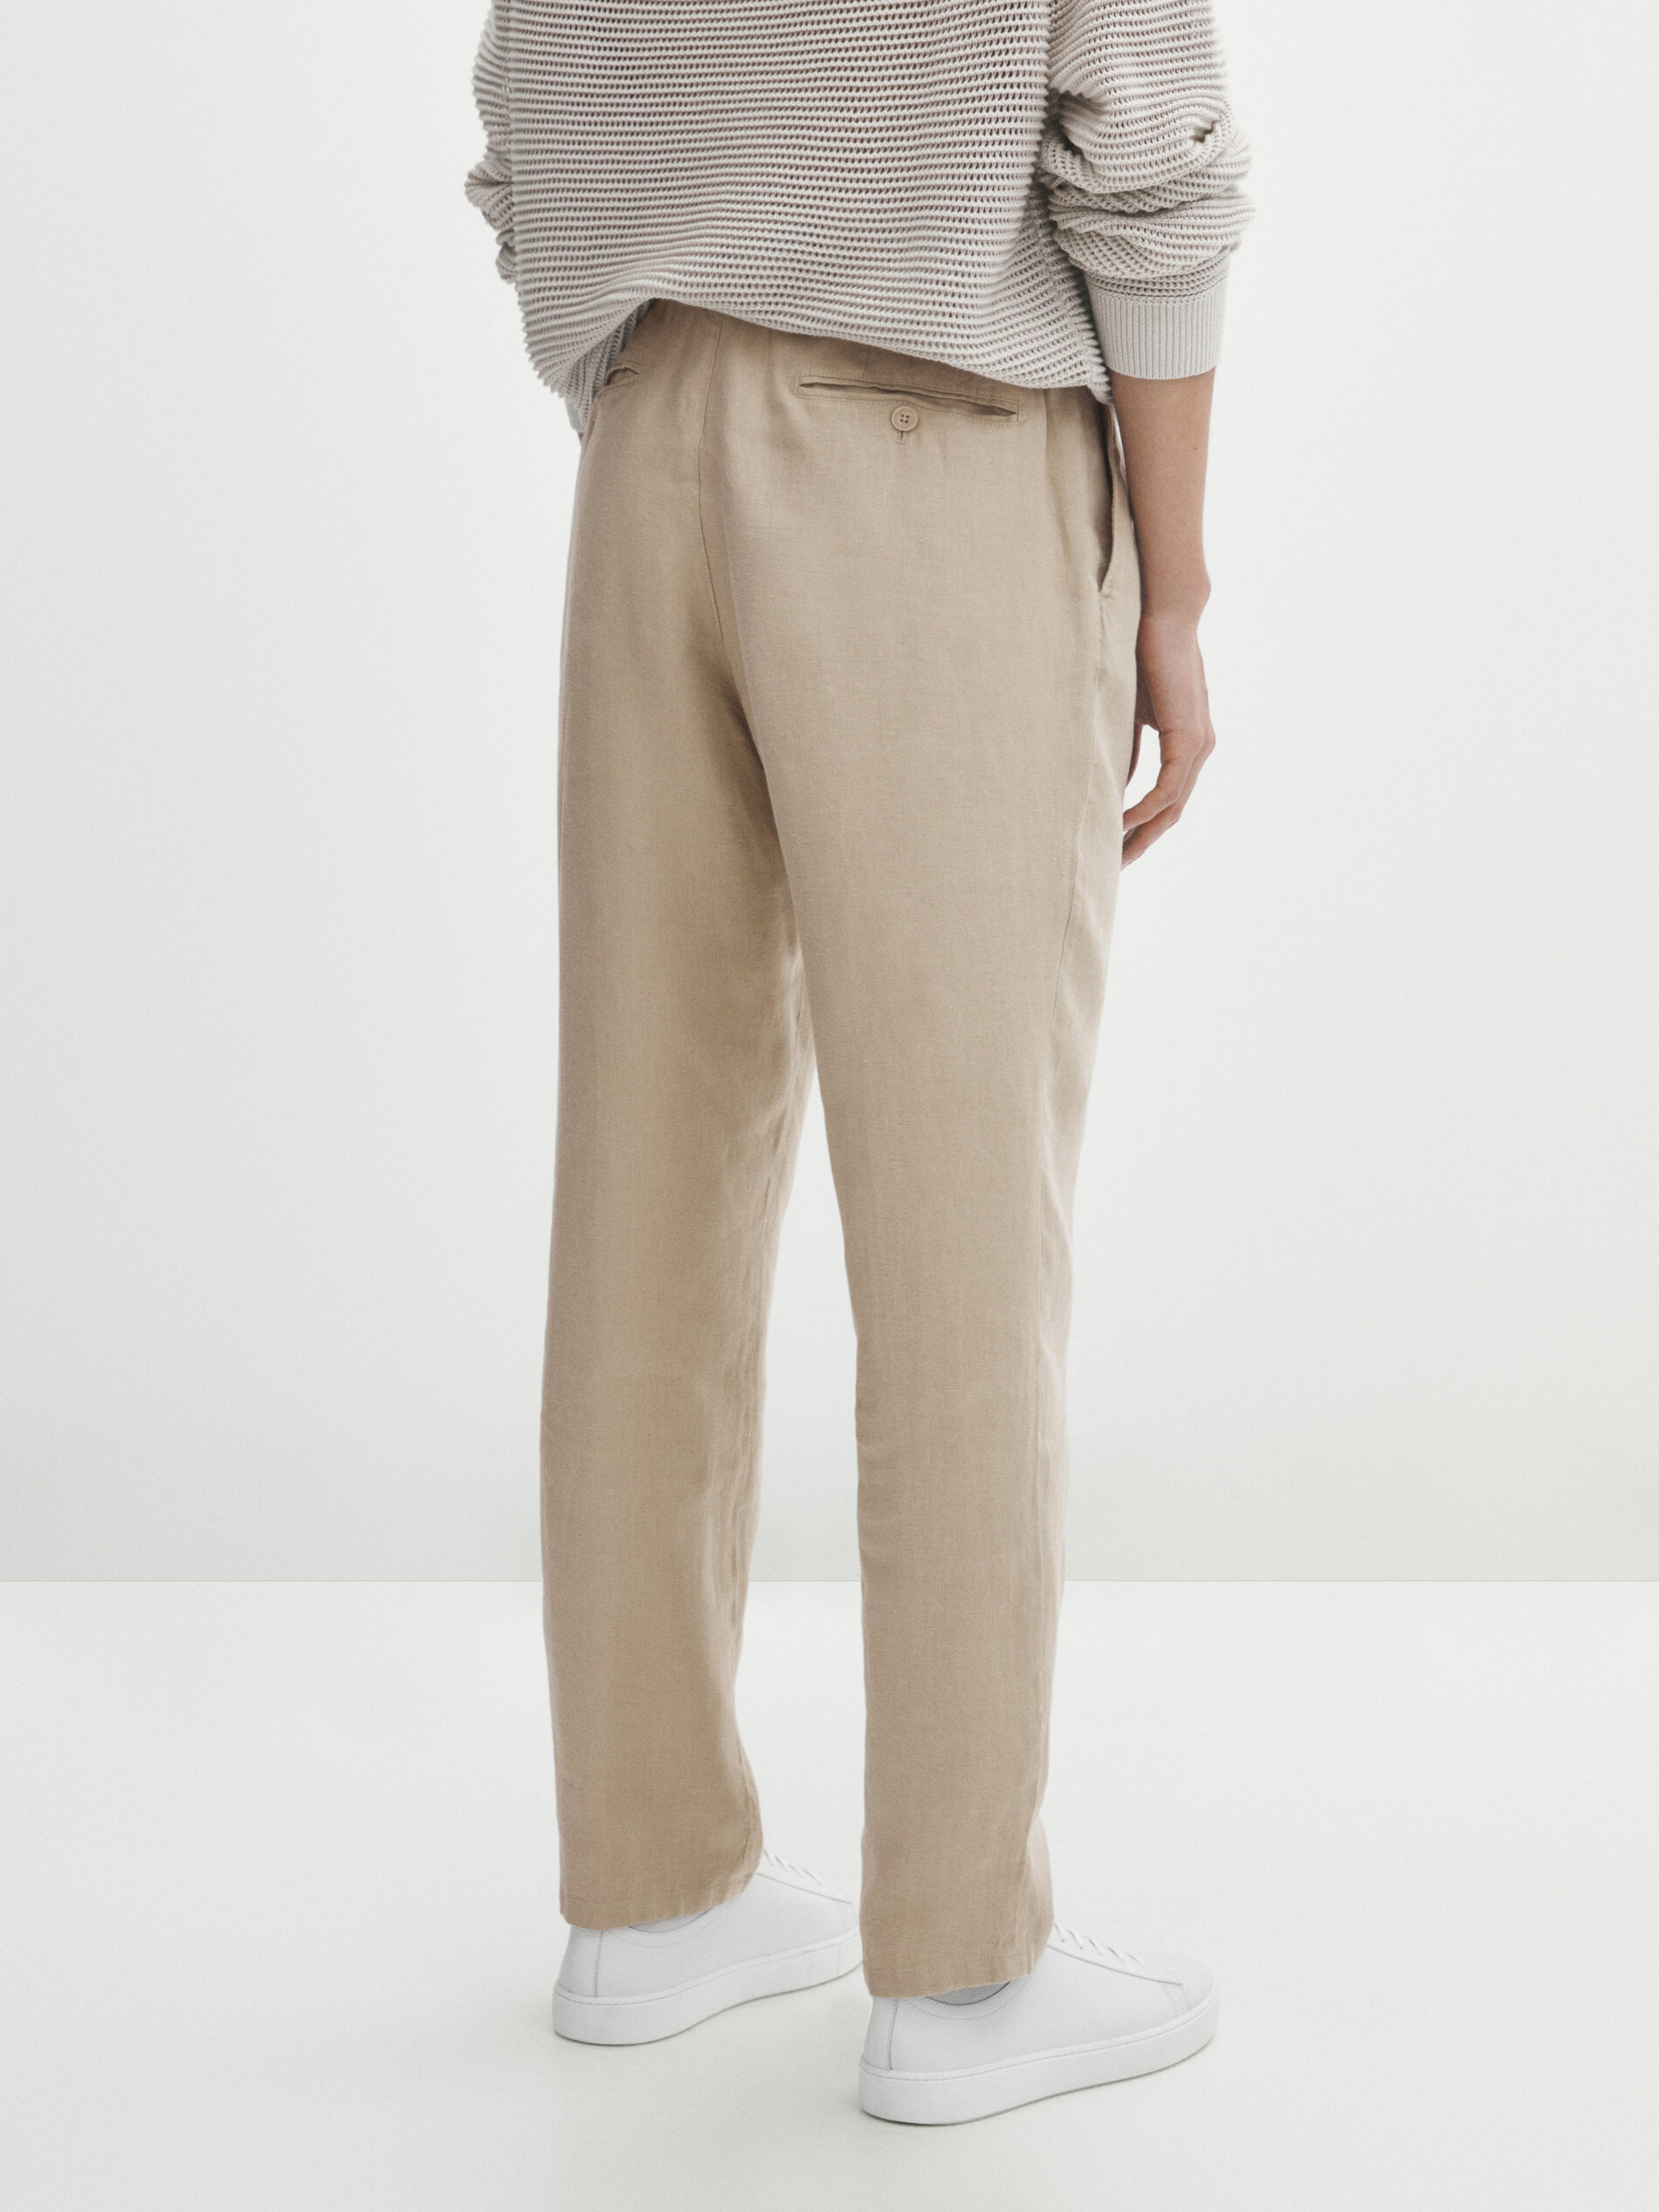 Buy Stone Grey Trousers & Pants for Men by Marks & Spencer Online | Ajio.com